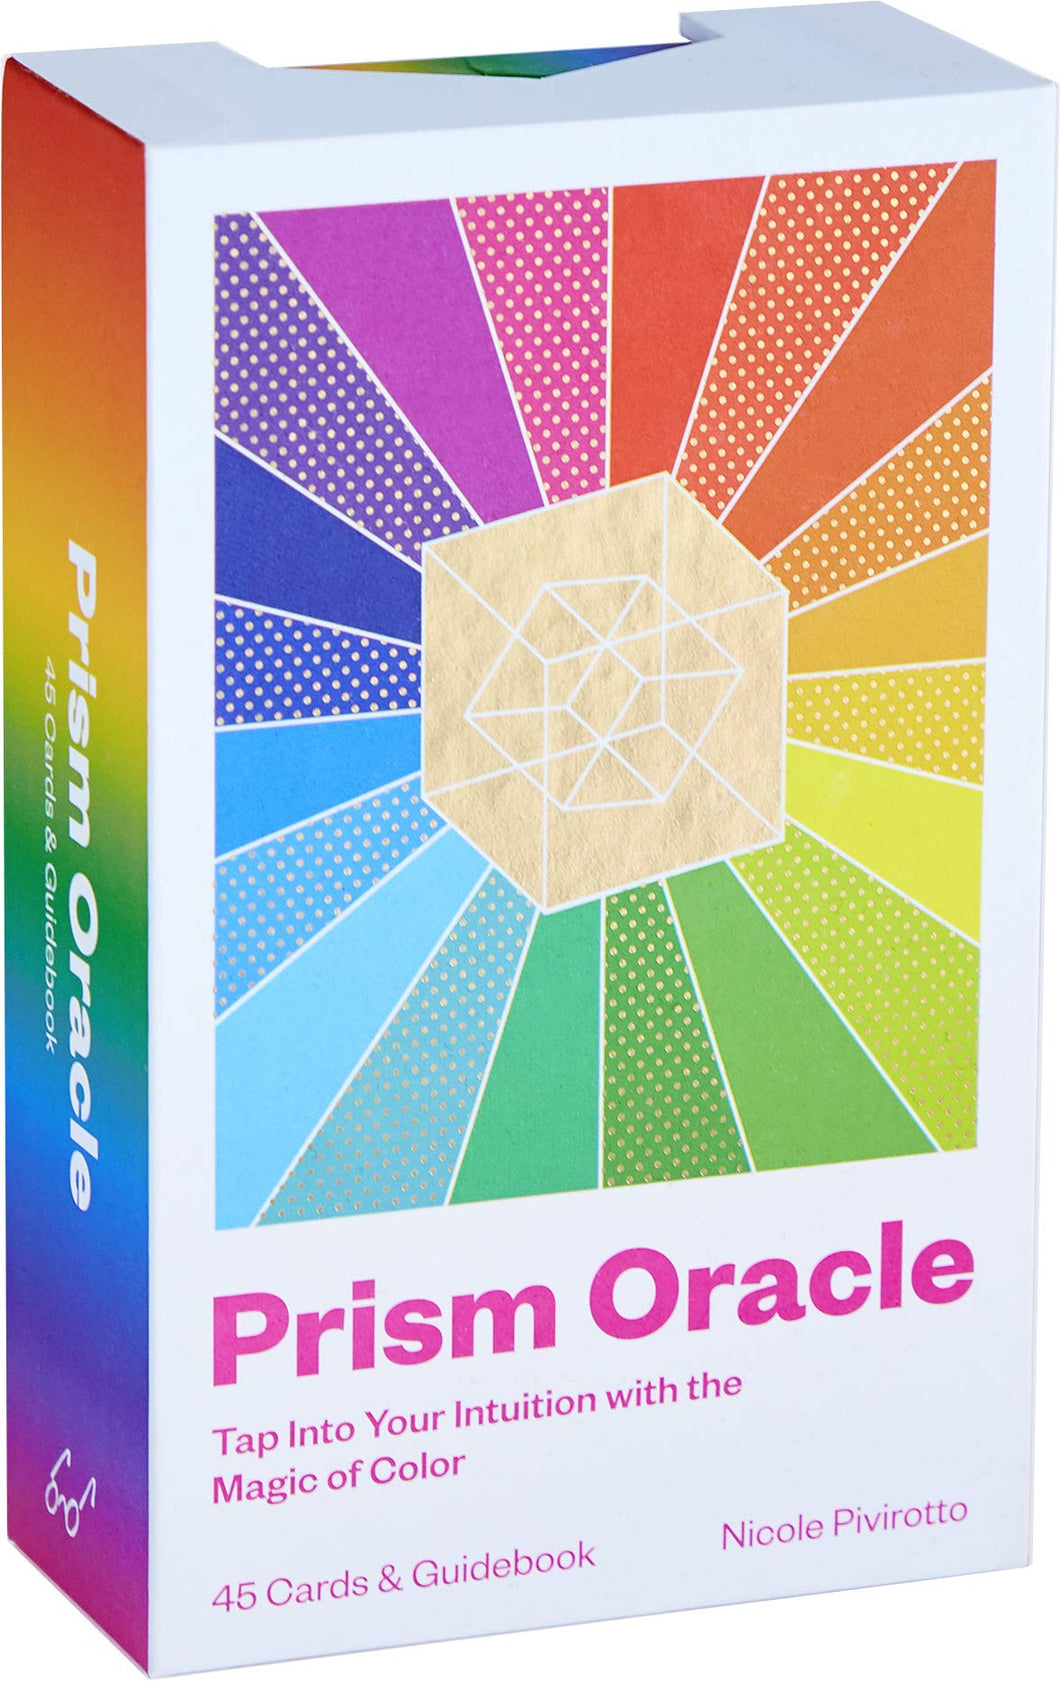 Prism Oracle: Tap Into Your Intuition With The Magic Of Color [Nicole Pivirotto]